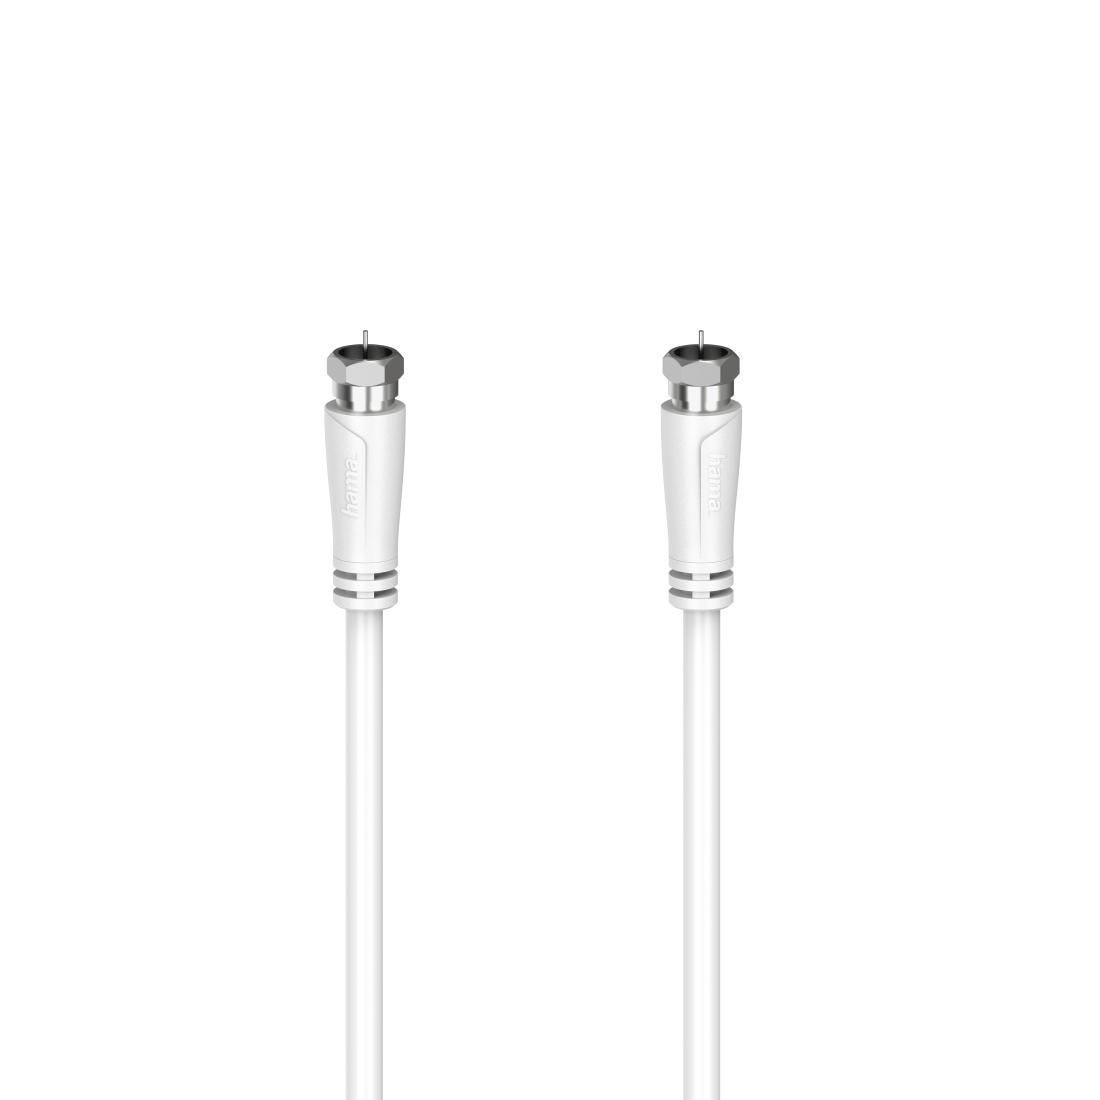 Hama 205065 W128824610 5 Coaxial Cable 5 M F White 